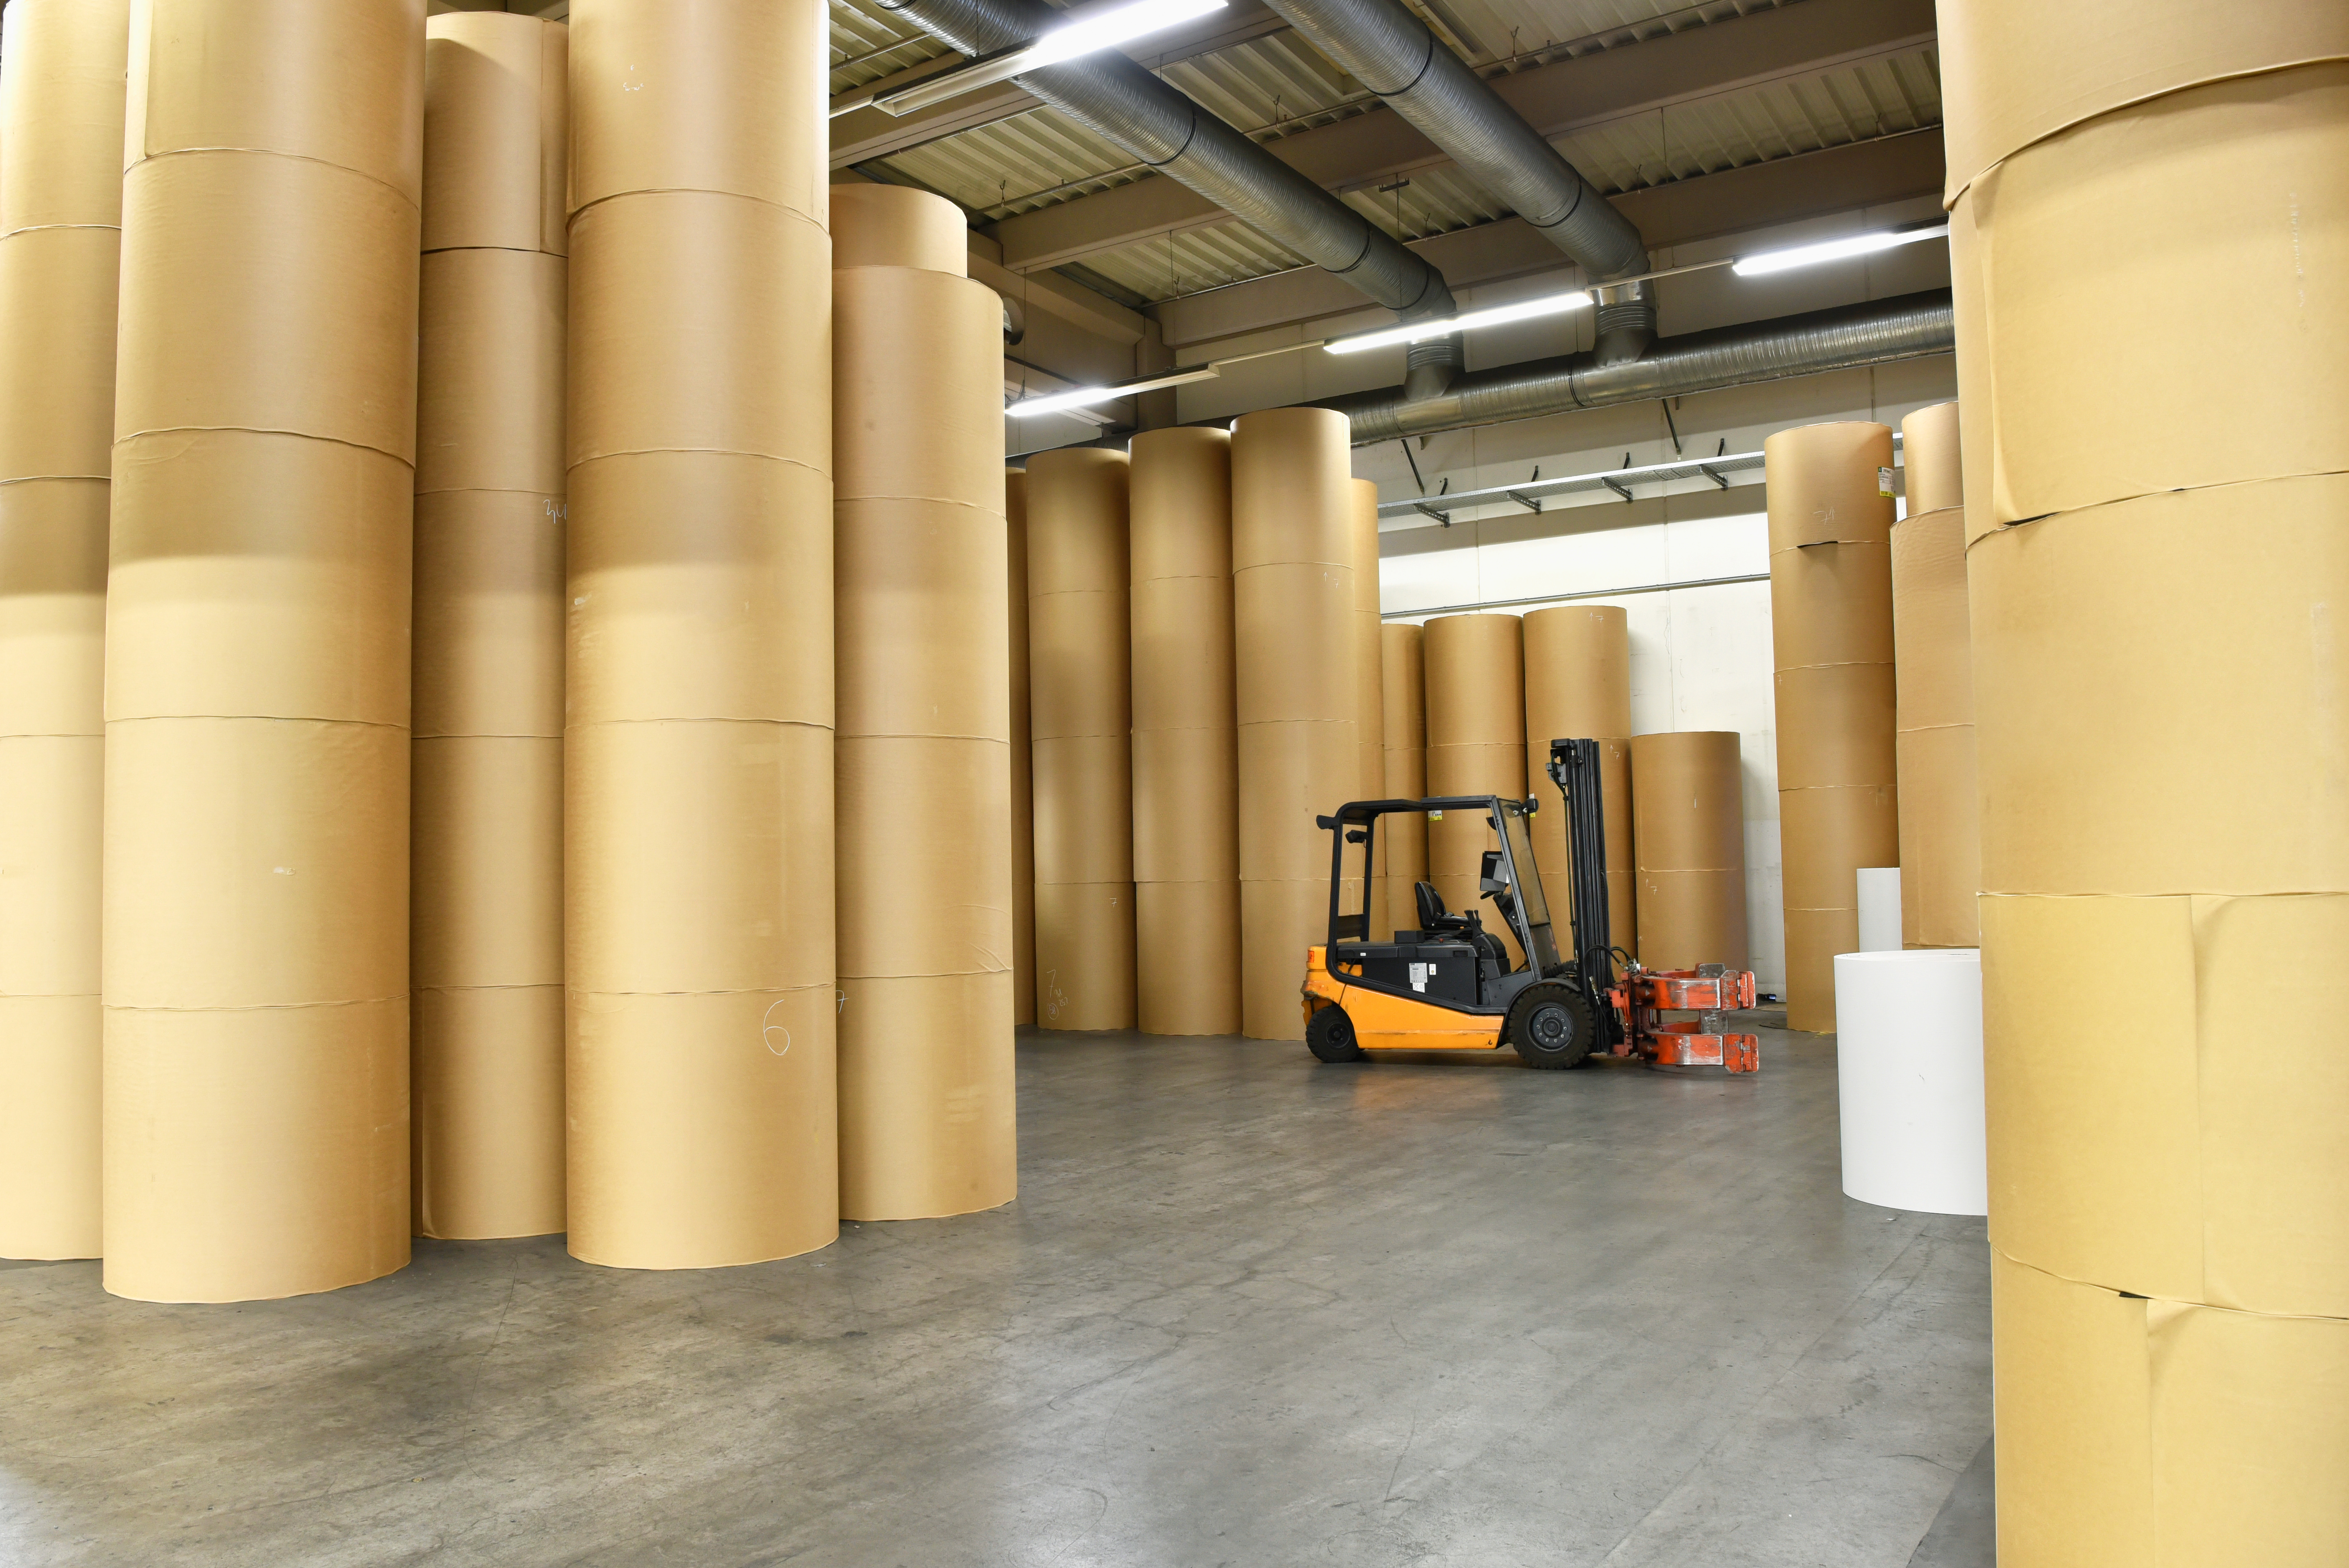 interior shot of a paper mill with stacks of paper and a forklift